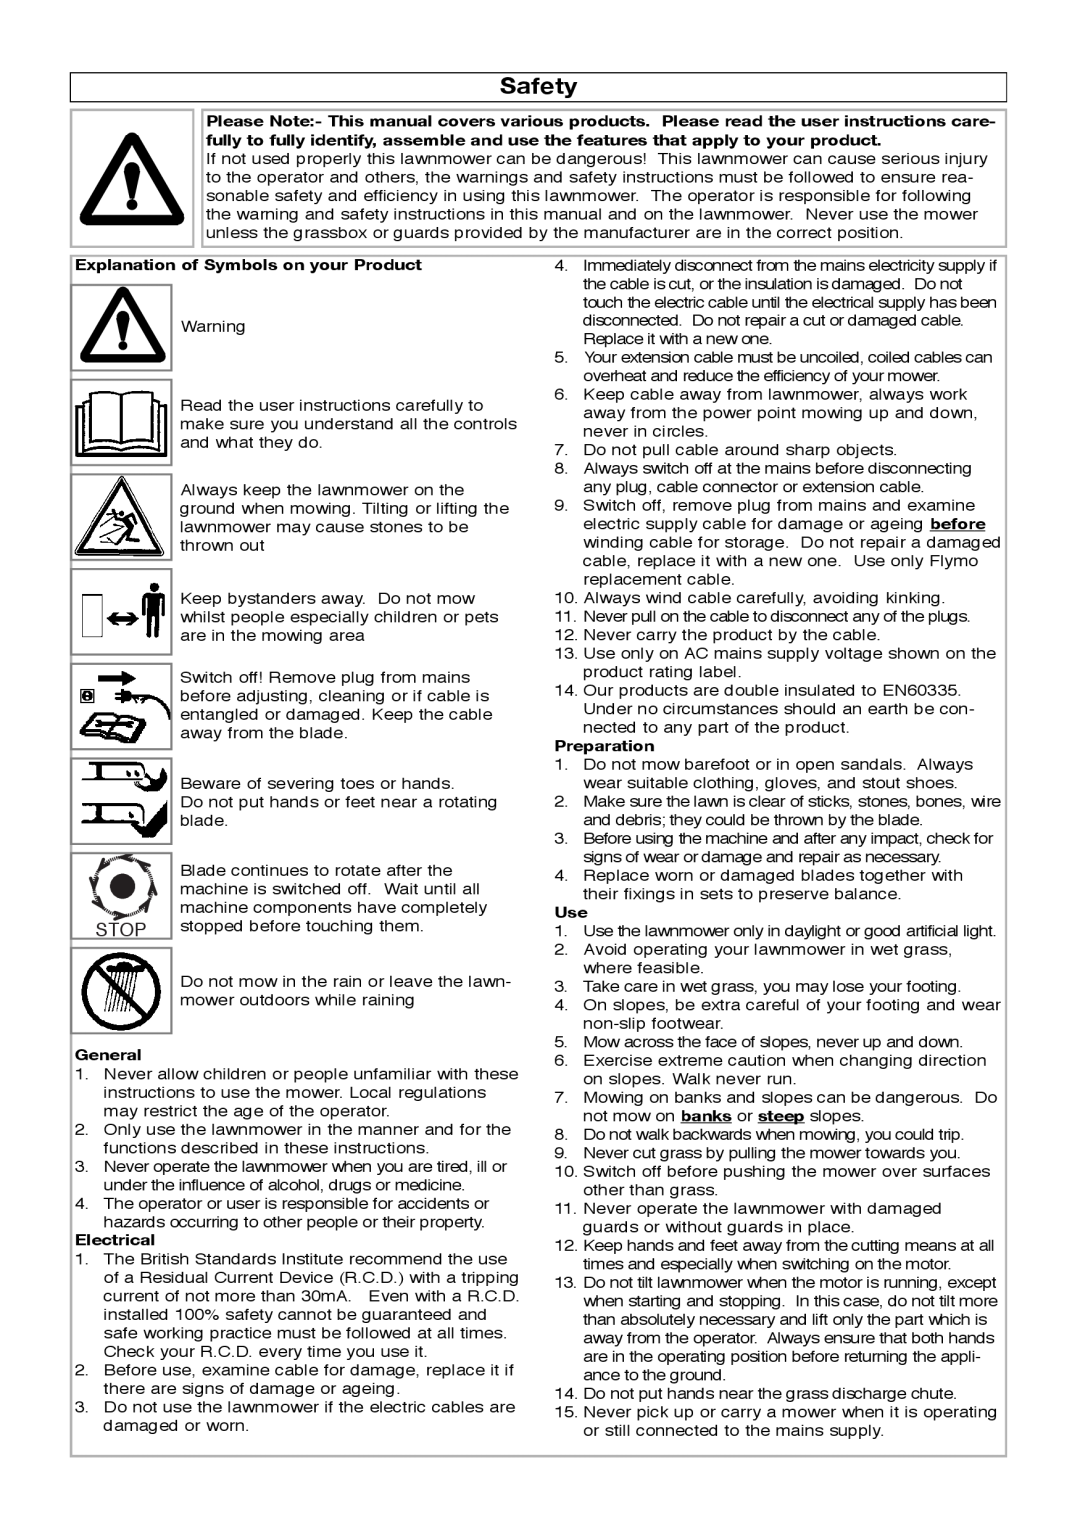 Flymo RE420c manual Safety, Explanation of Symbols on your Product, General, Electrical, Preparation, Stop 